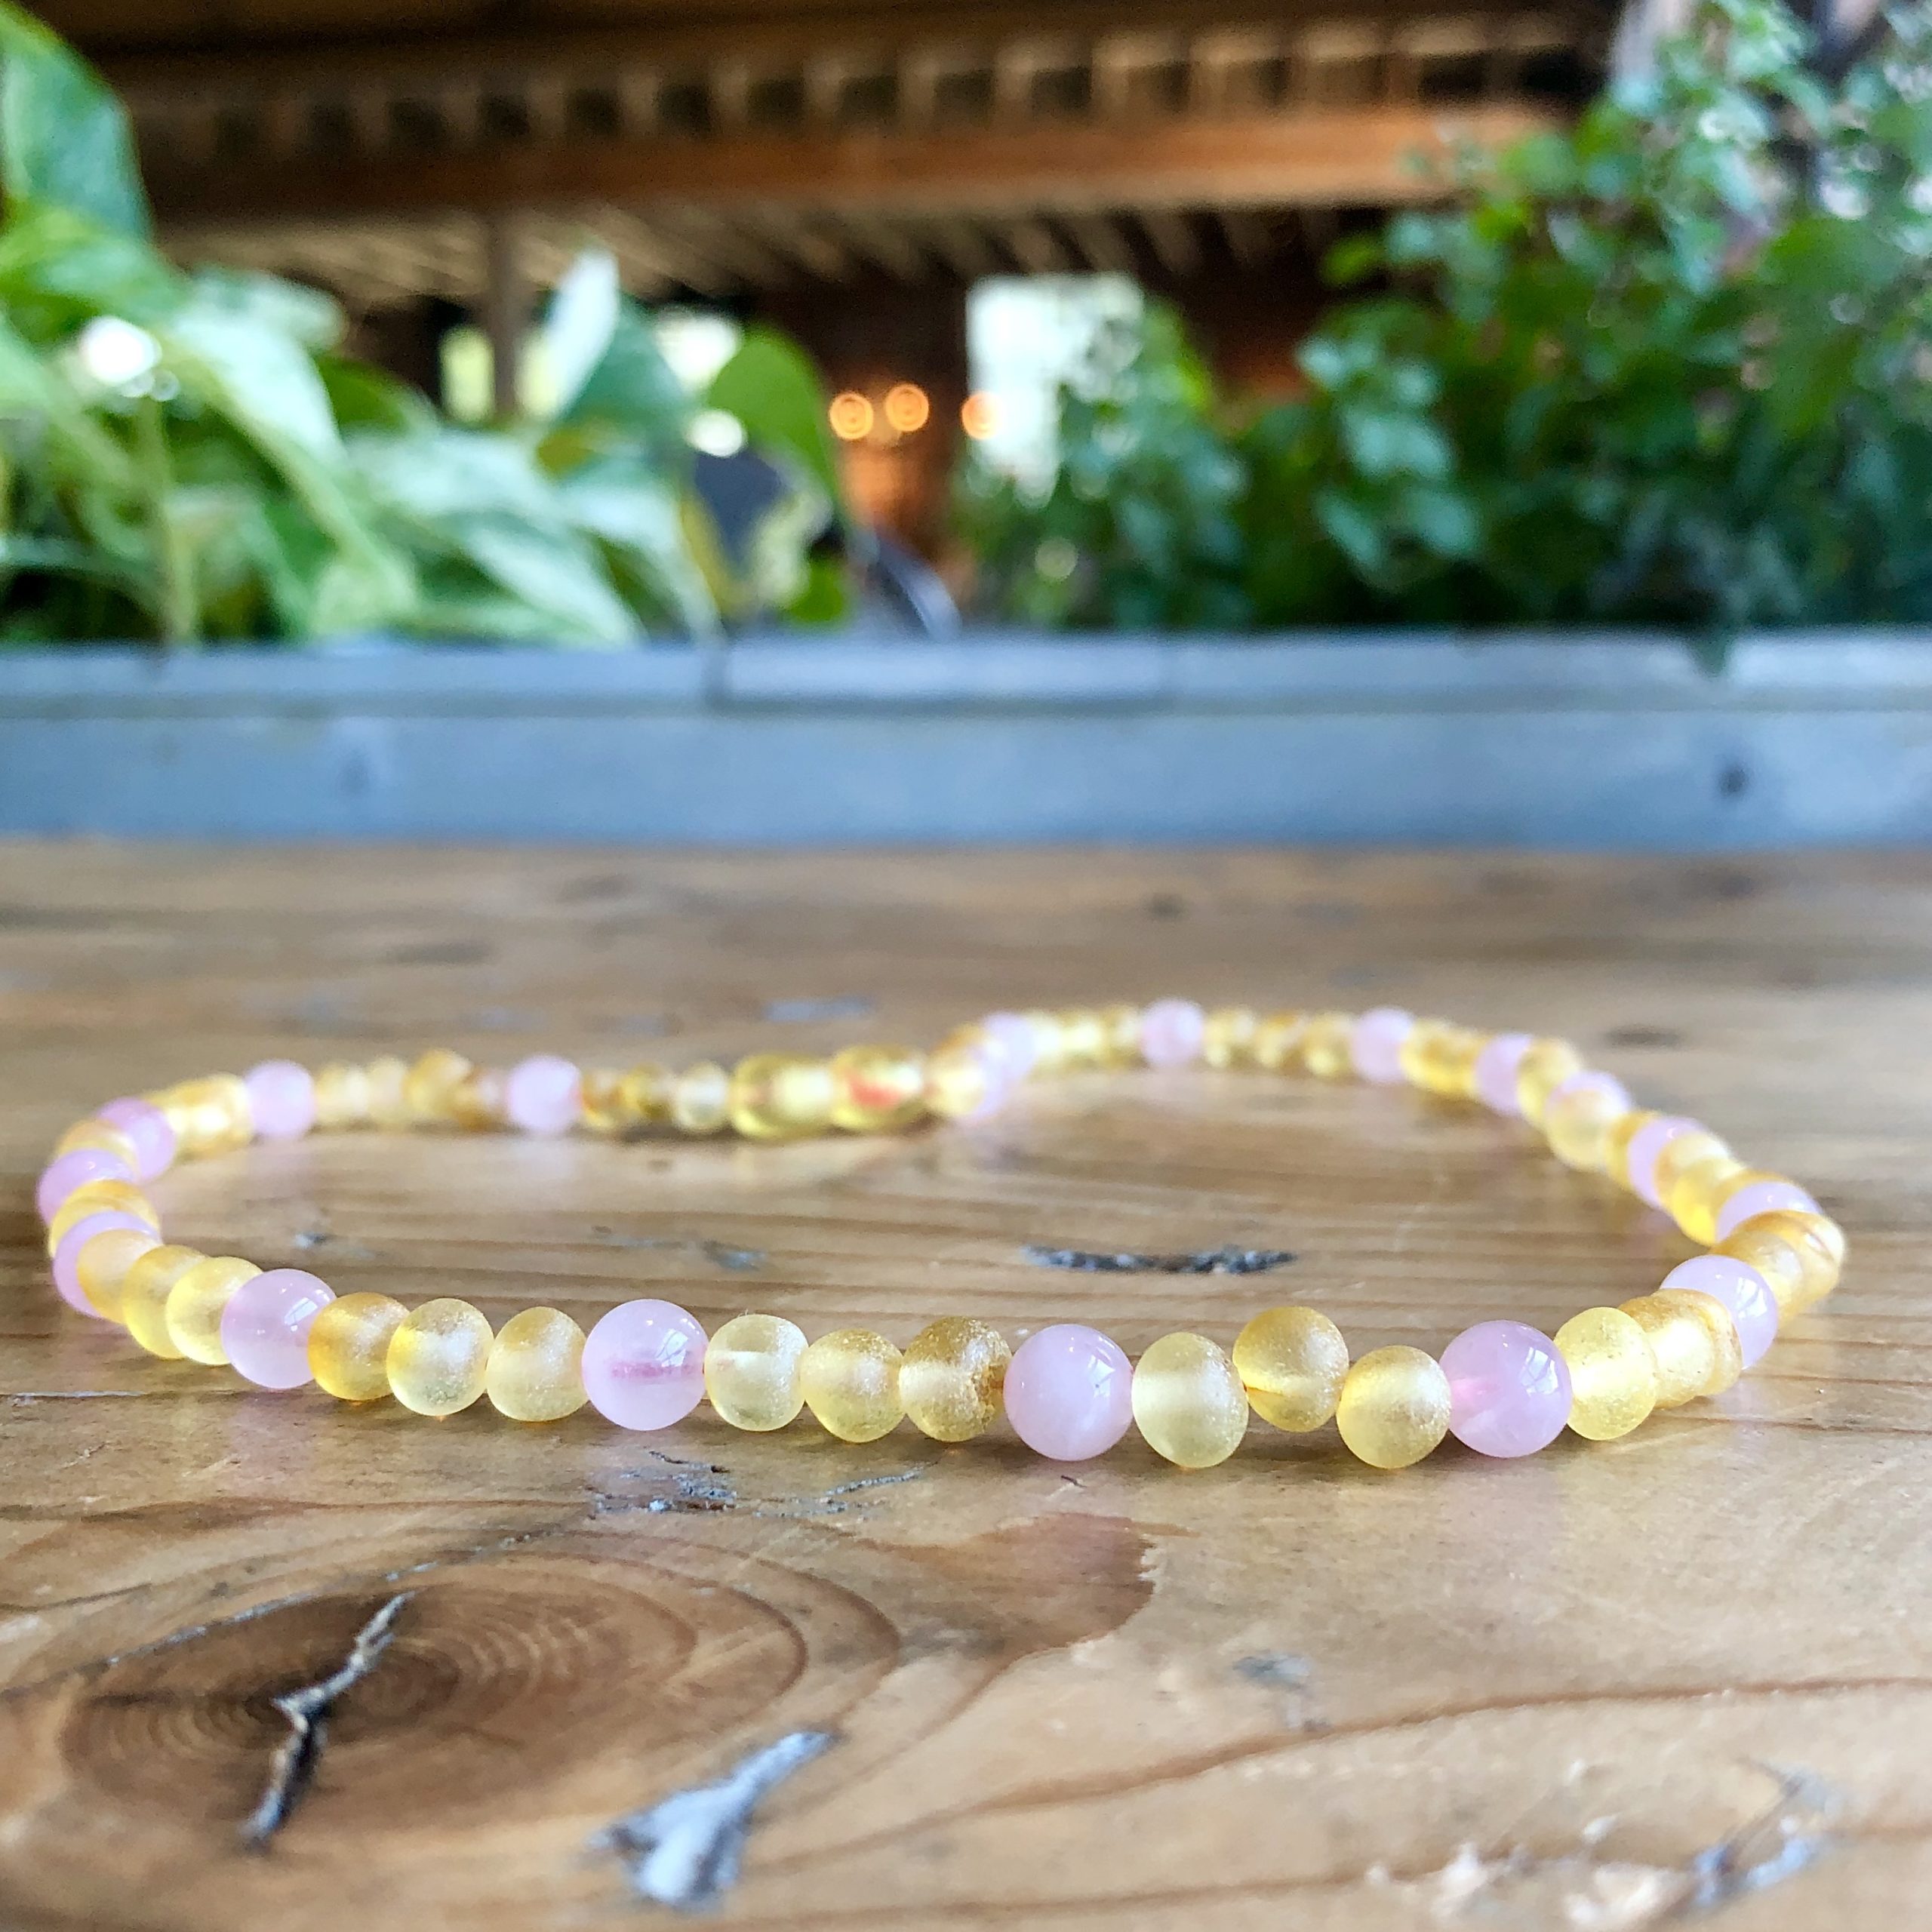 Adult Amber Necklace or Bracelet - Raw Amber Honey Color with Genuine Rose  Quartz Beads by Lolly Llama - Lolly Llama